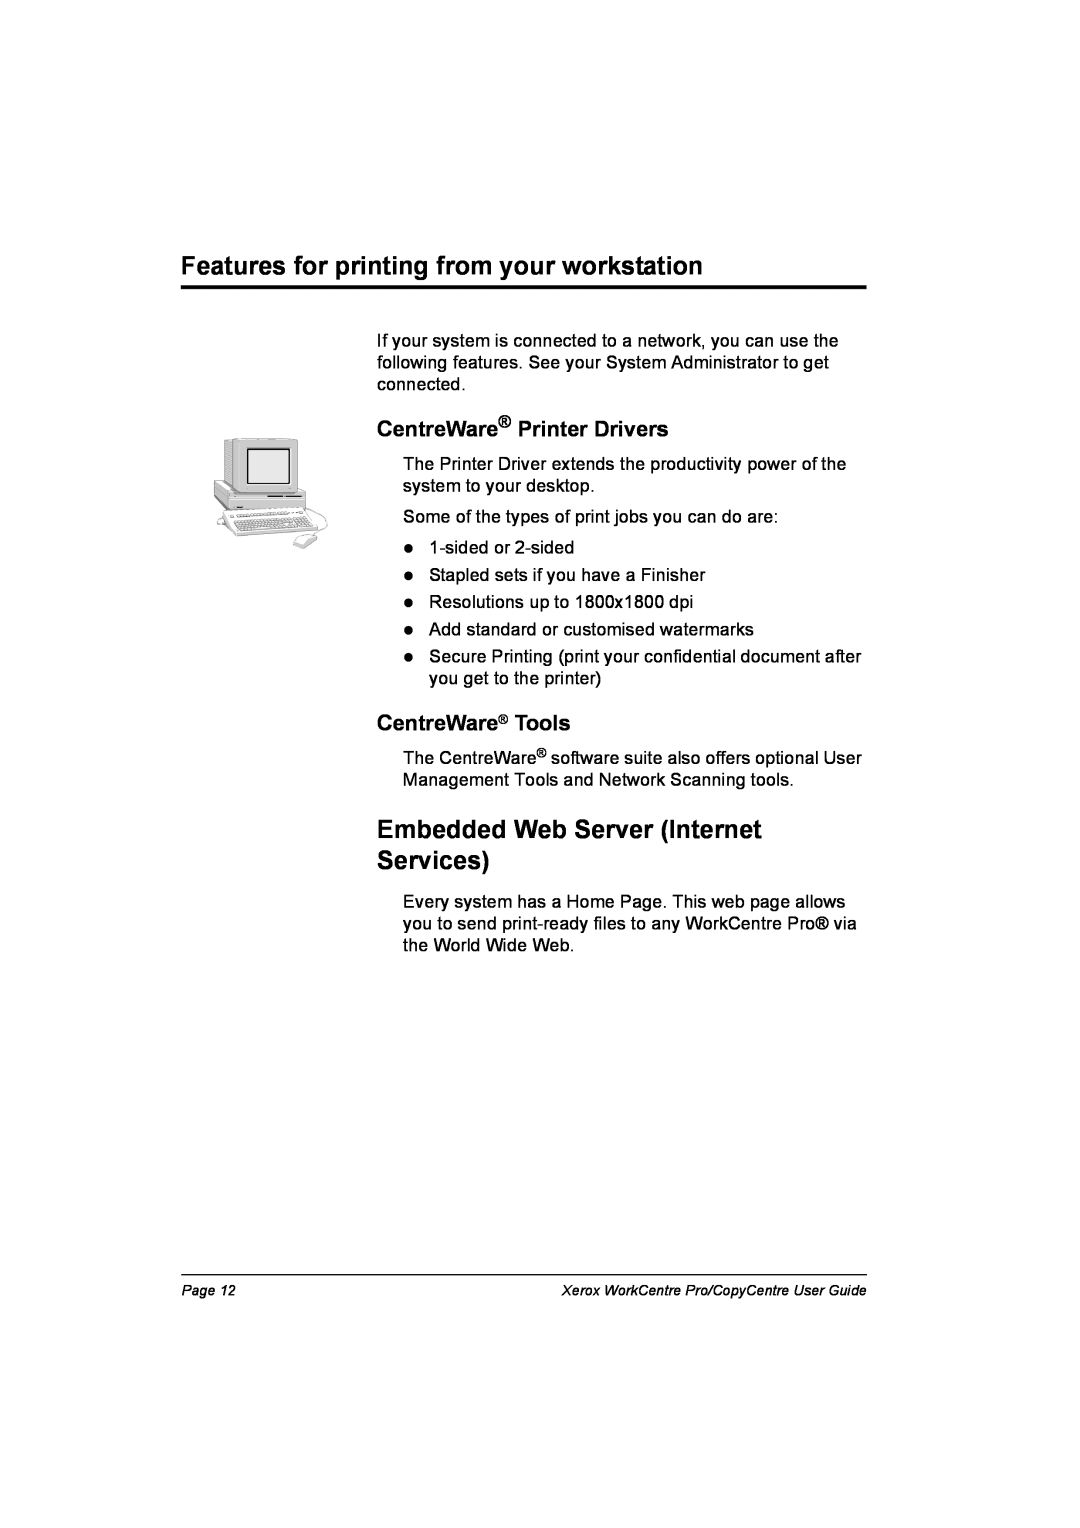 Xerox C90 Features for printing from your workstation, Embedded Web Server Internet Services, CentreWare Printer Drivers 